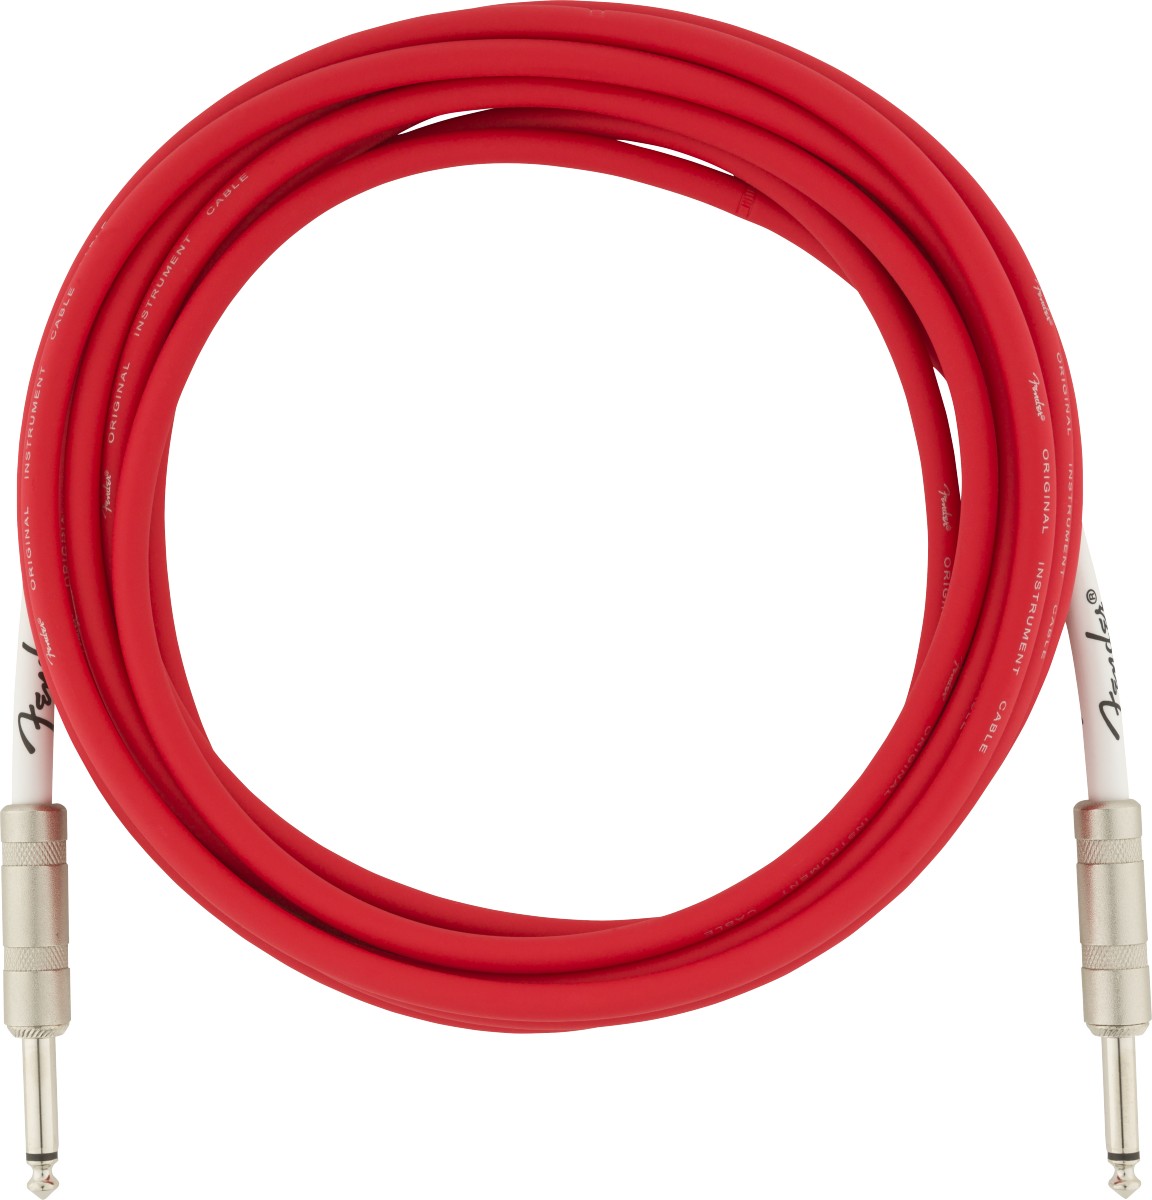 An image of Fender Original Series Instrument Cable 15', Fiesta Red | PMT Online